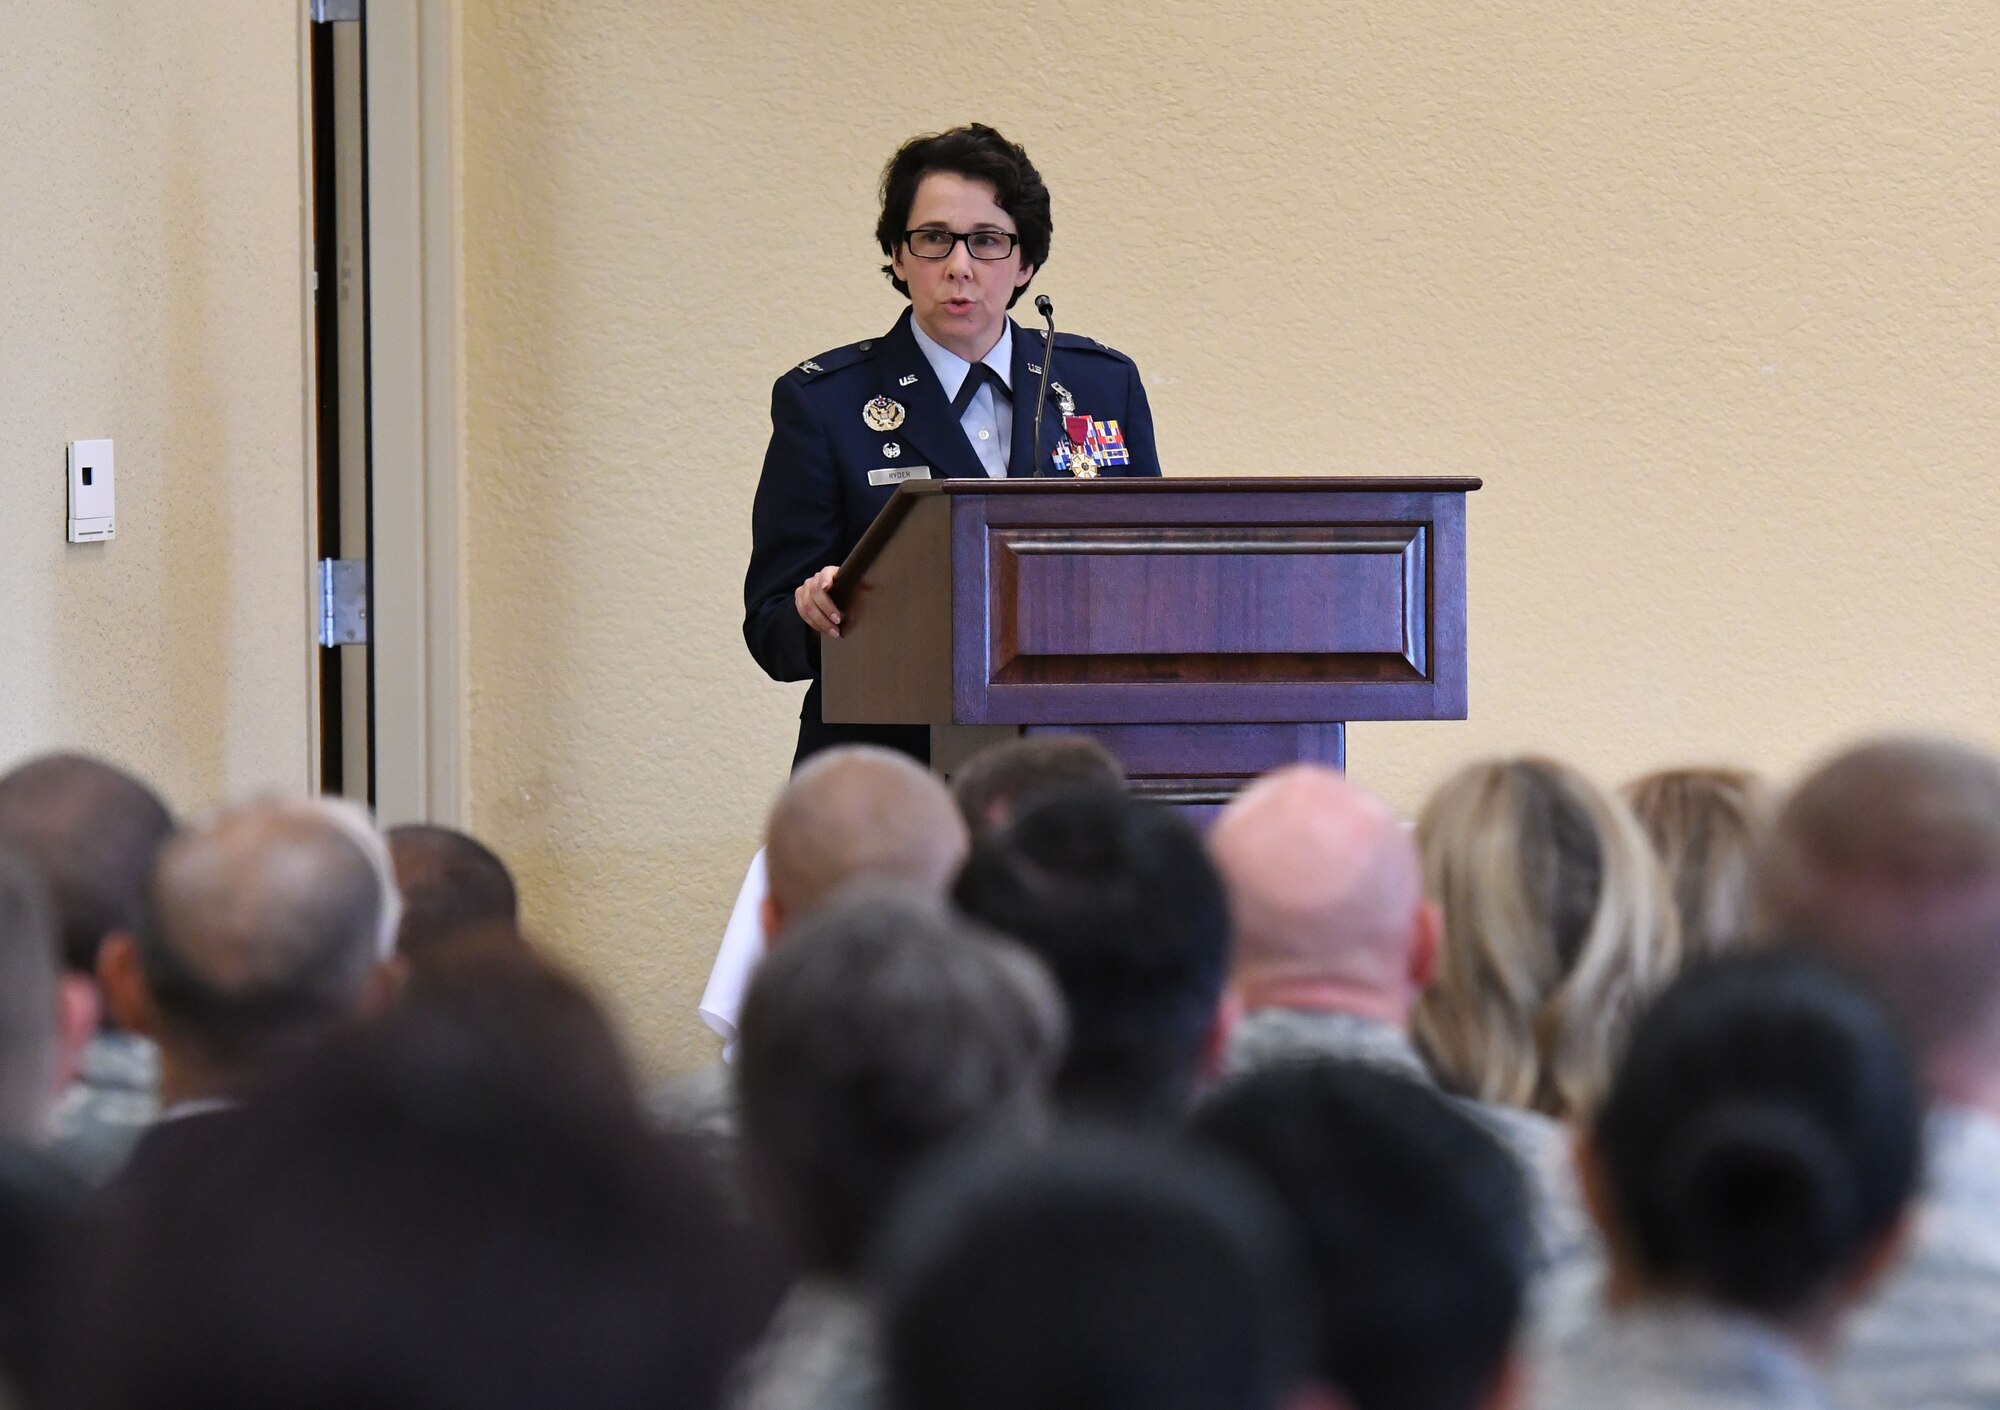 U.S. Air Force Col. Jeannine Ryder, outgoing 81st Medical Group commander, delivers remarks during the 81st MDG change of command ceremony in the Bay Breeze Event Center at Keesler Air Force Base, Mississippi, June 22, 2018. Ryder relinquished command of the 81st MDG and will be heading to the Air Force Material Command, Wright-Patterson Air Force Base, Ohio, where she will be the surgeon general. (U.S. Air Force photo by Kemberly Groue)